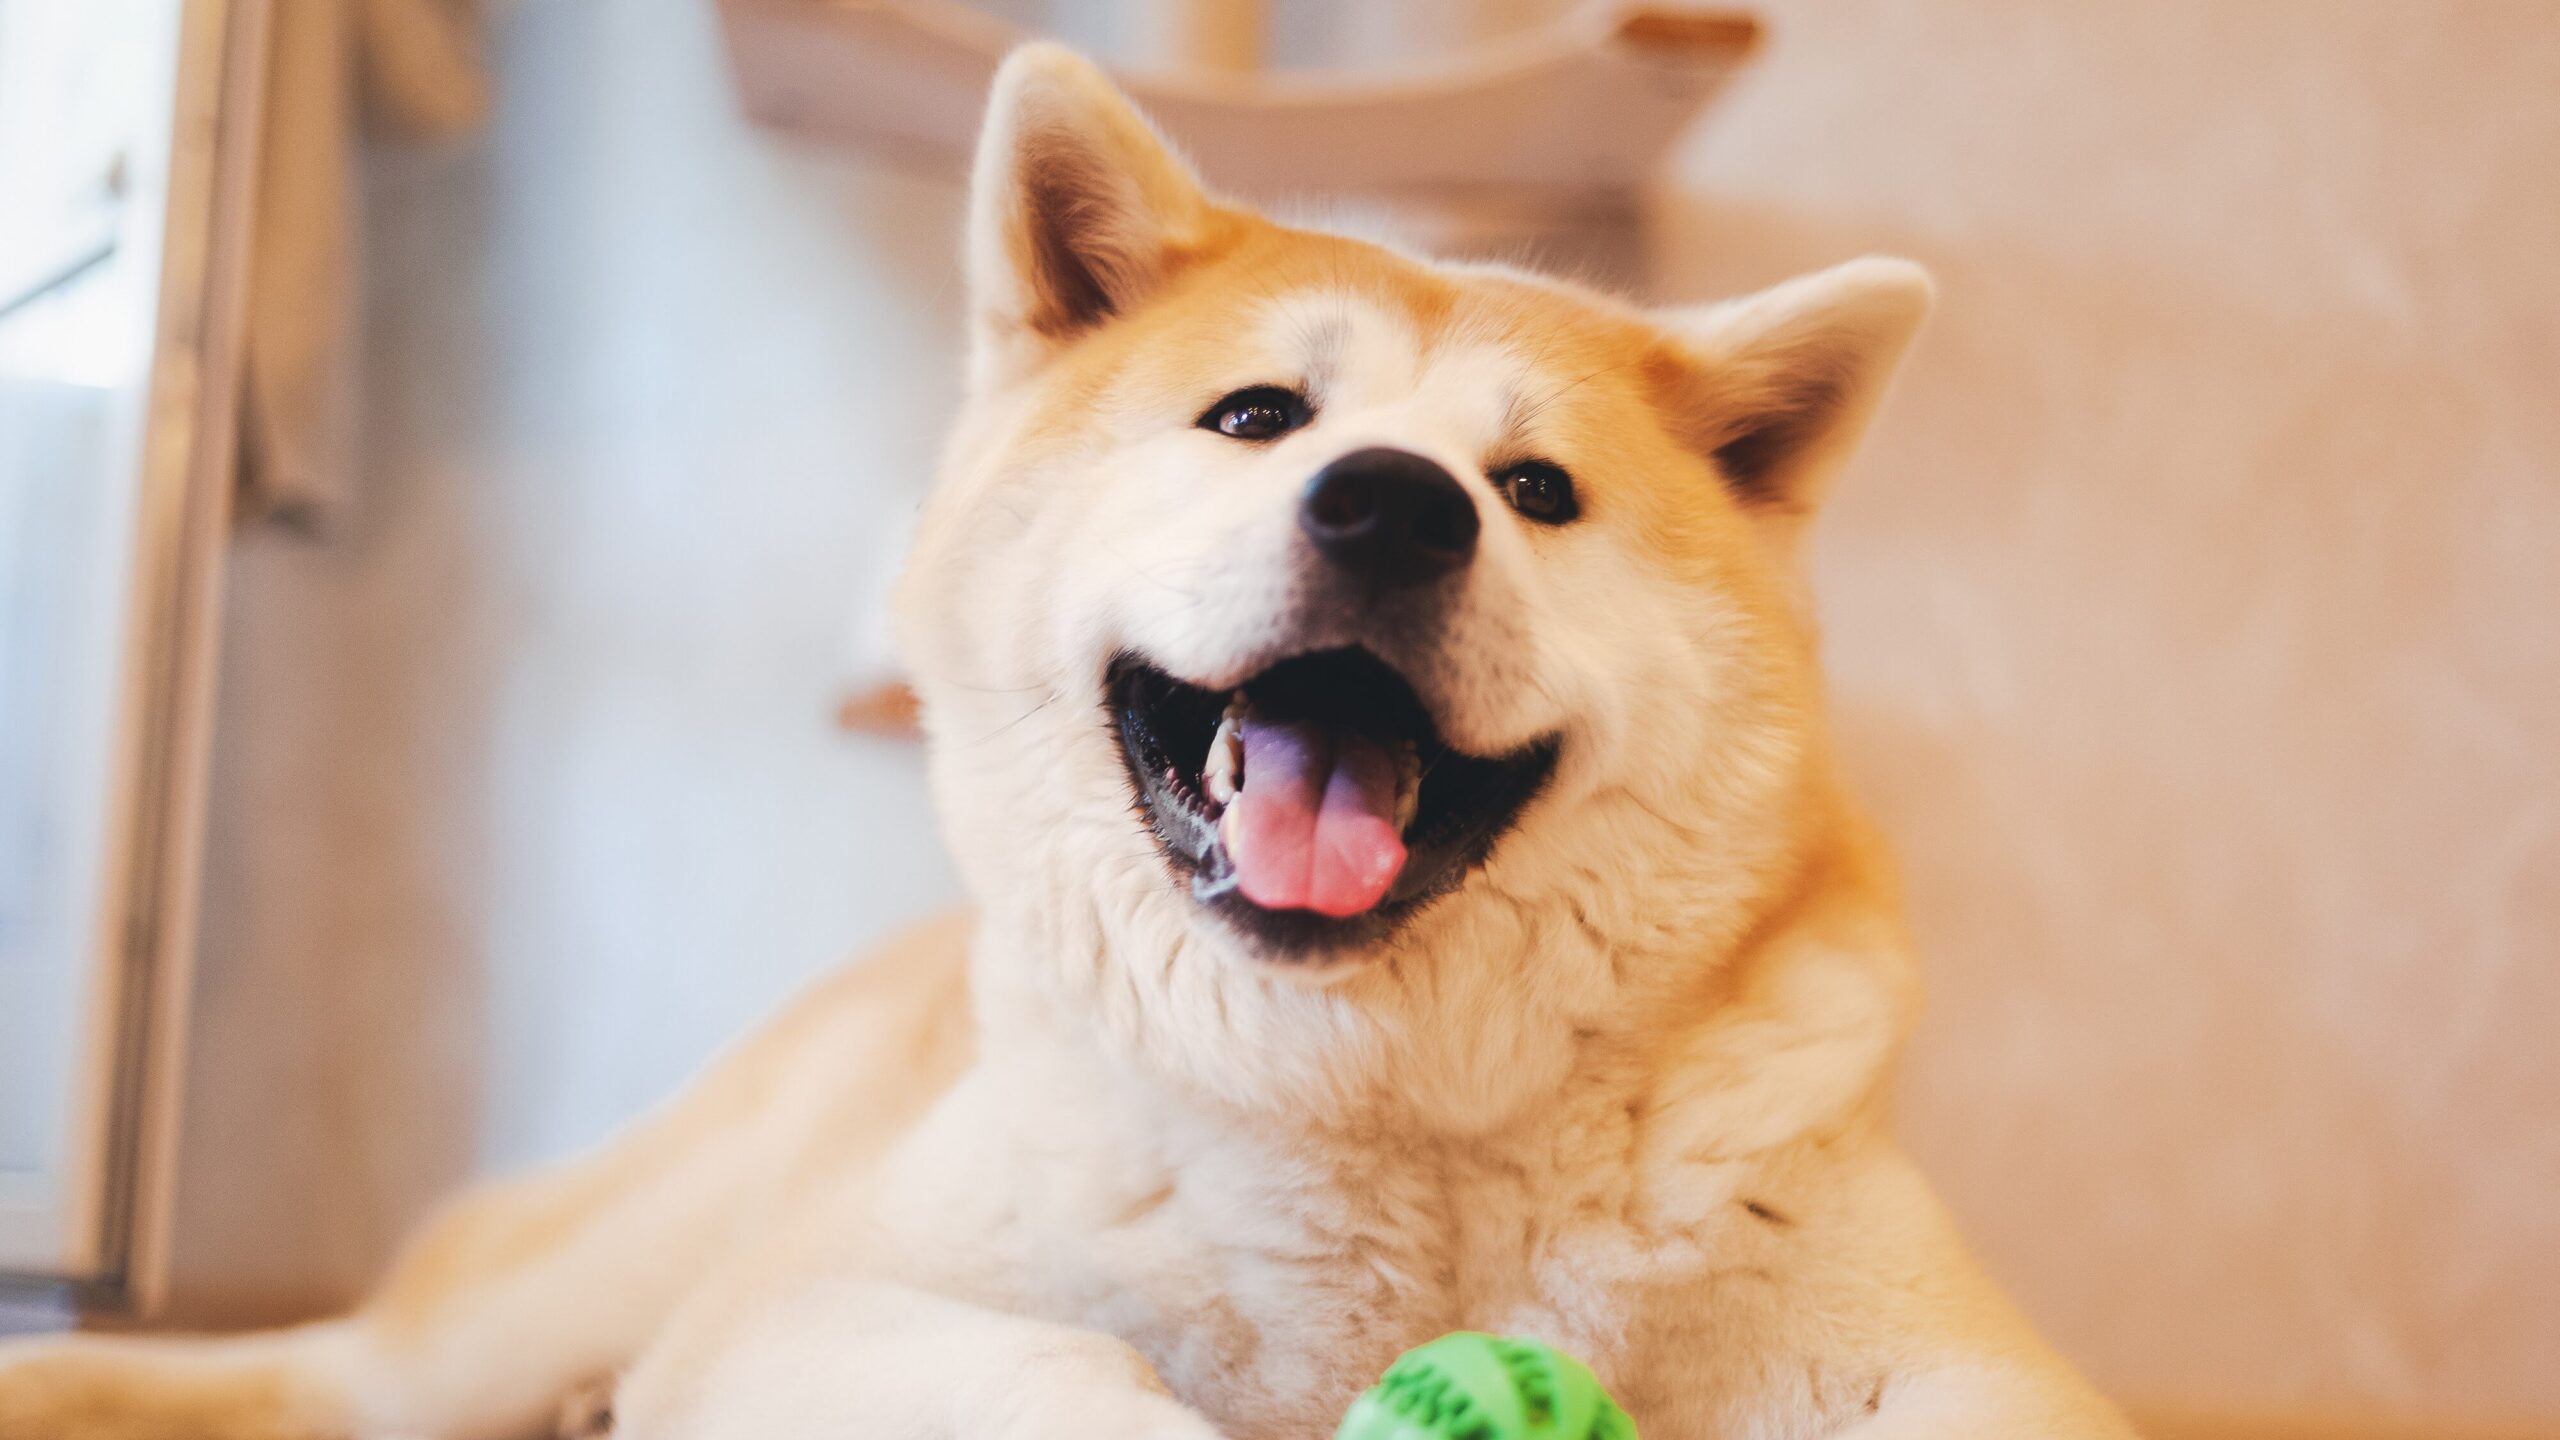 Akaita Inu's dog plays with a green ball at home, lying on the floor, funny cute